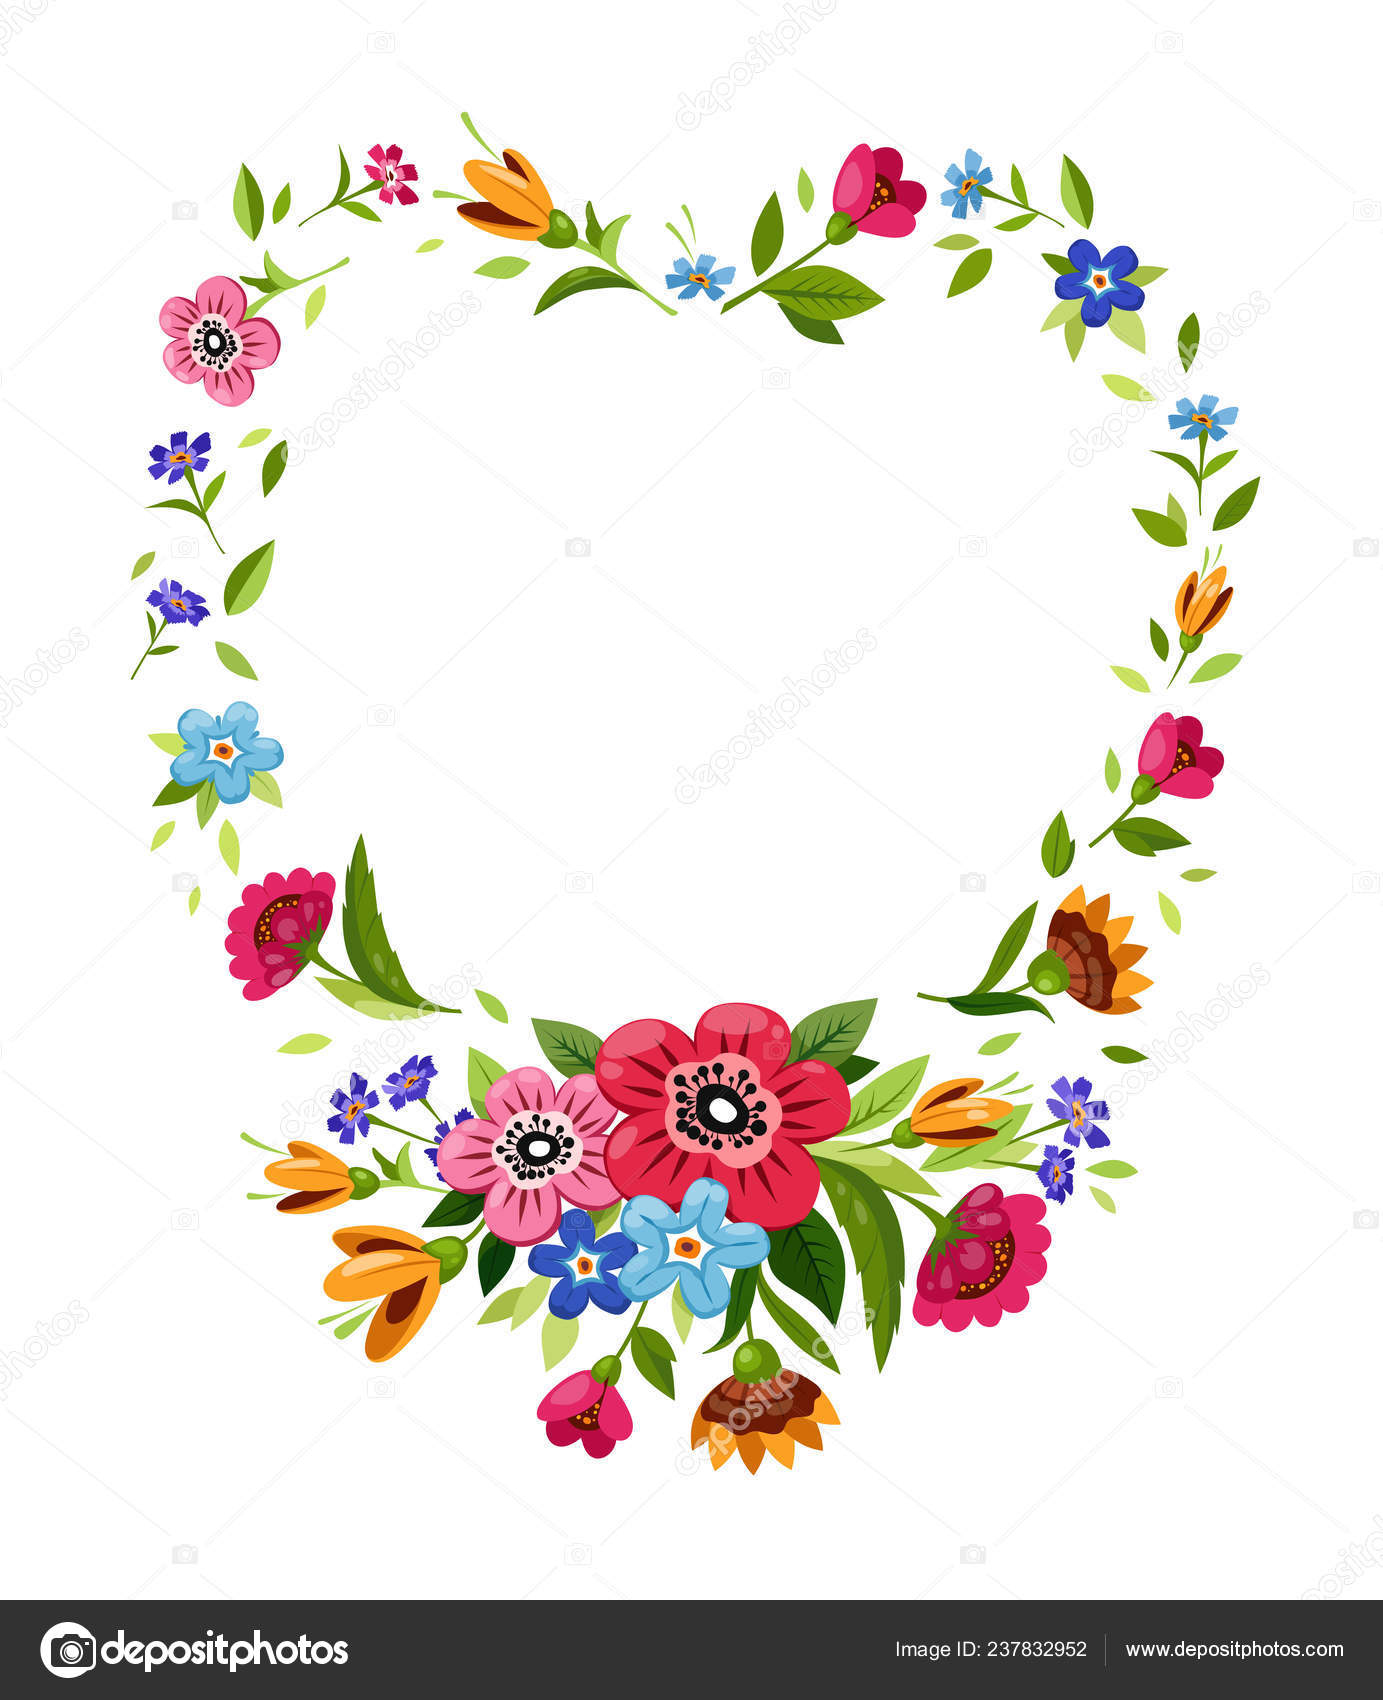 Flower Frame In Heart Shape Vector Floral Frame Illustration With Flower Wreath With Flowers Symbol Of Romantic Passion Vector Image By C Natalypaint Vector Stock